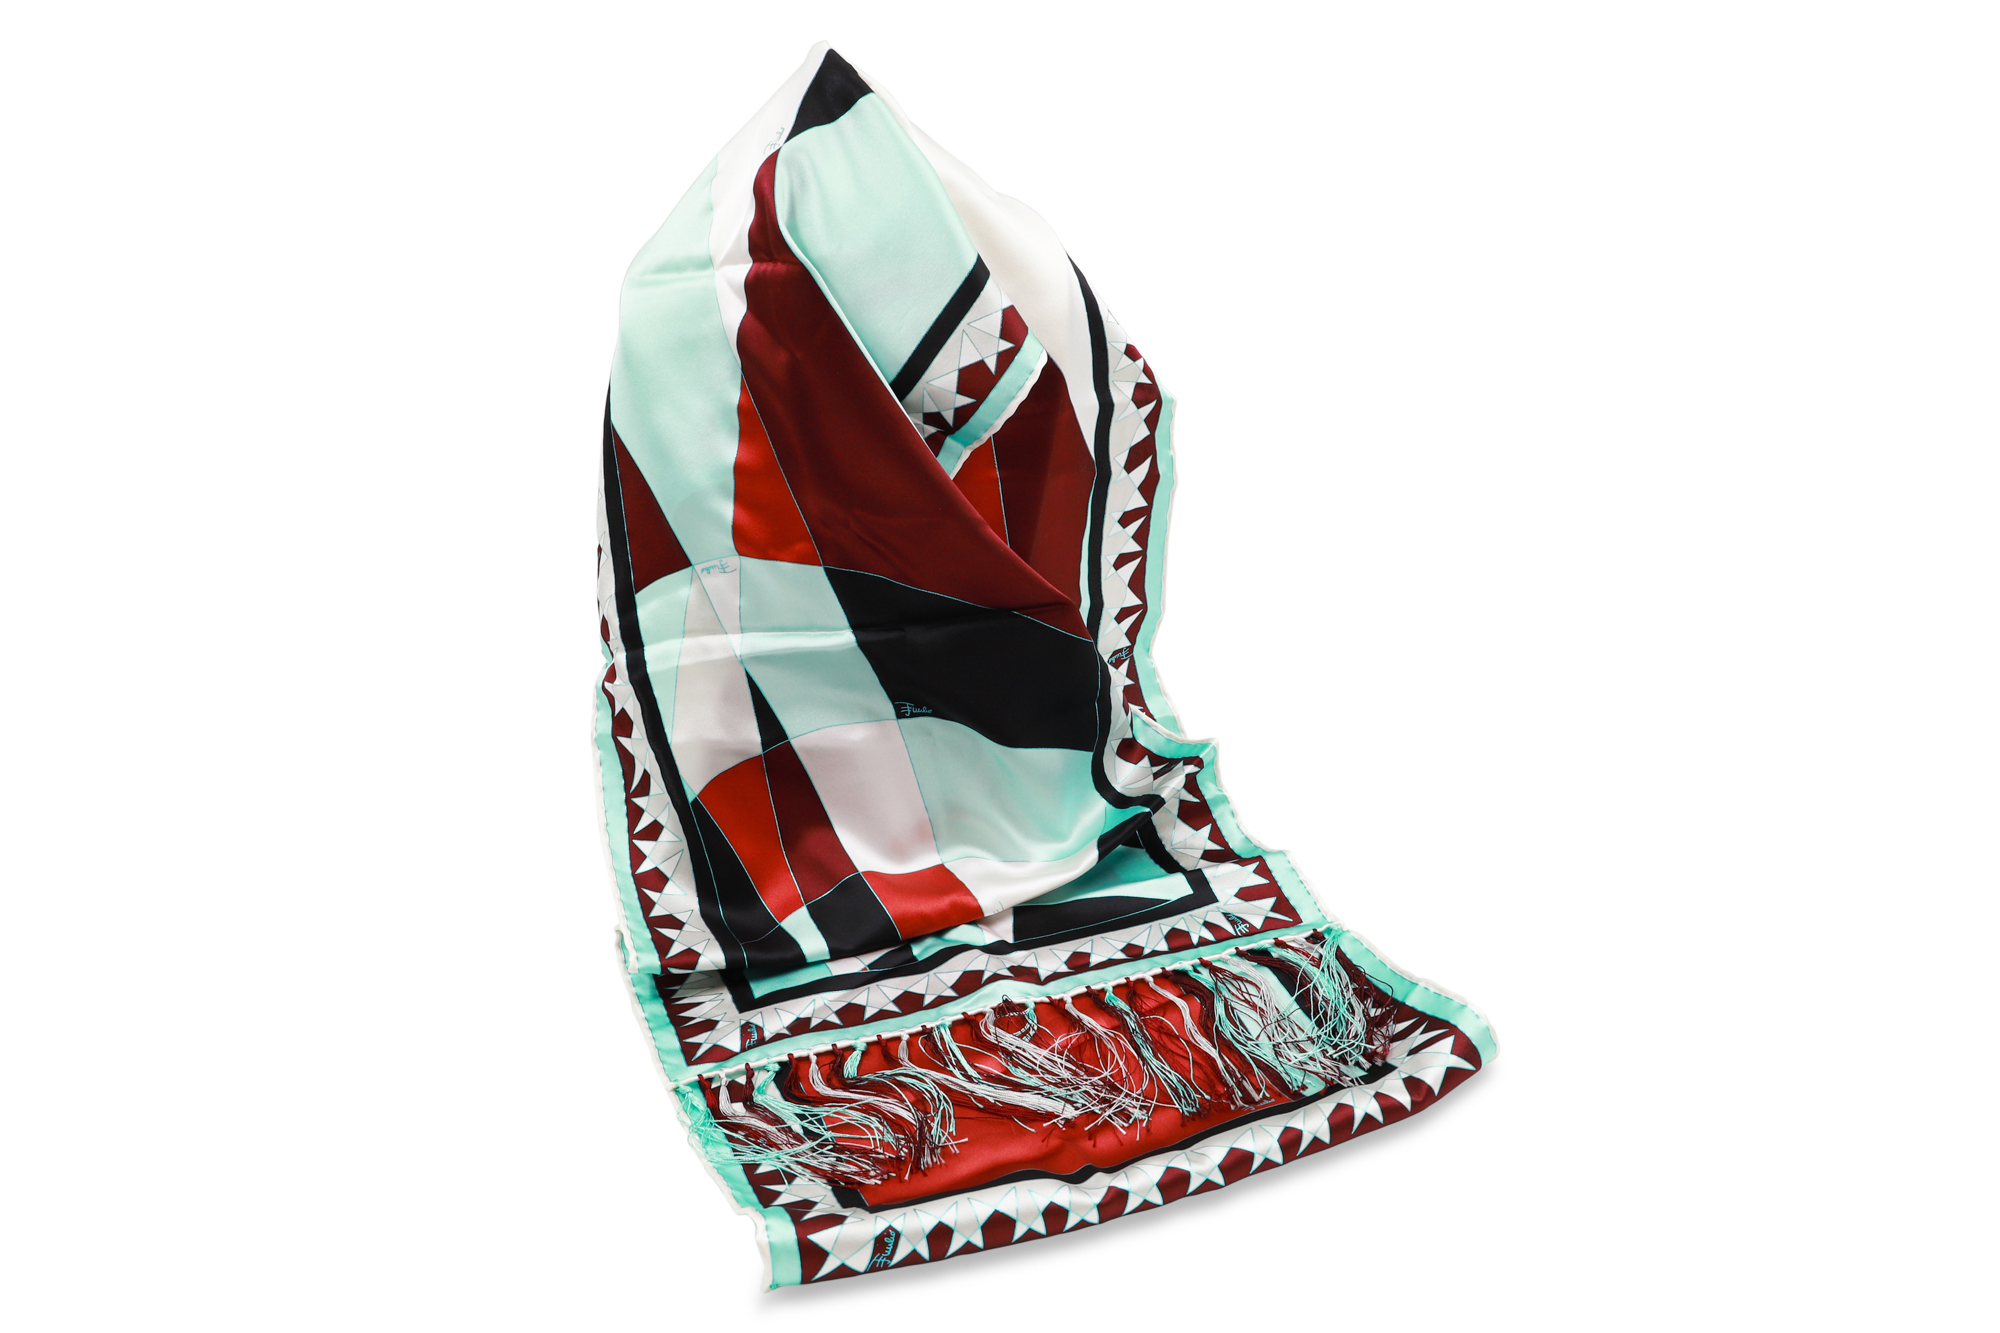 AN EMILIO PUCCI FIRENZE SILK SCARF, long style with fringe